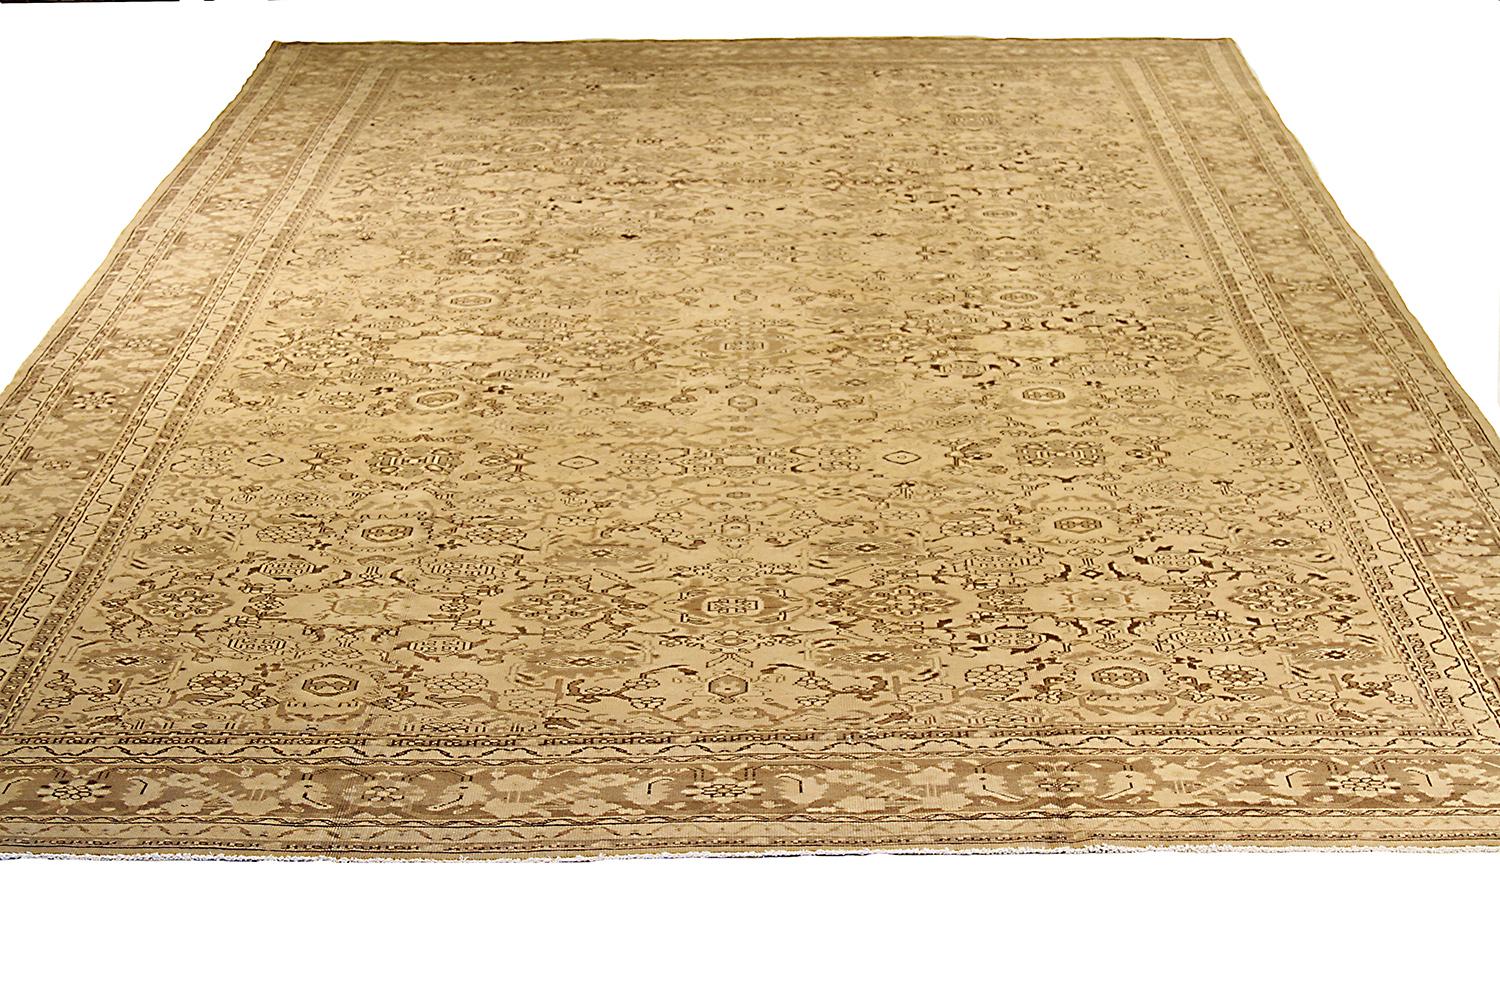 Antique Persian rug handwoven from the finest sheep’s wool and colored with all-natural vegetable dyes that are safe for humans and pets. It’s a traditional Malayer design featuring brown and black floral details on an ivory field. It’s a lovely